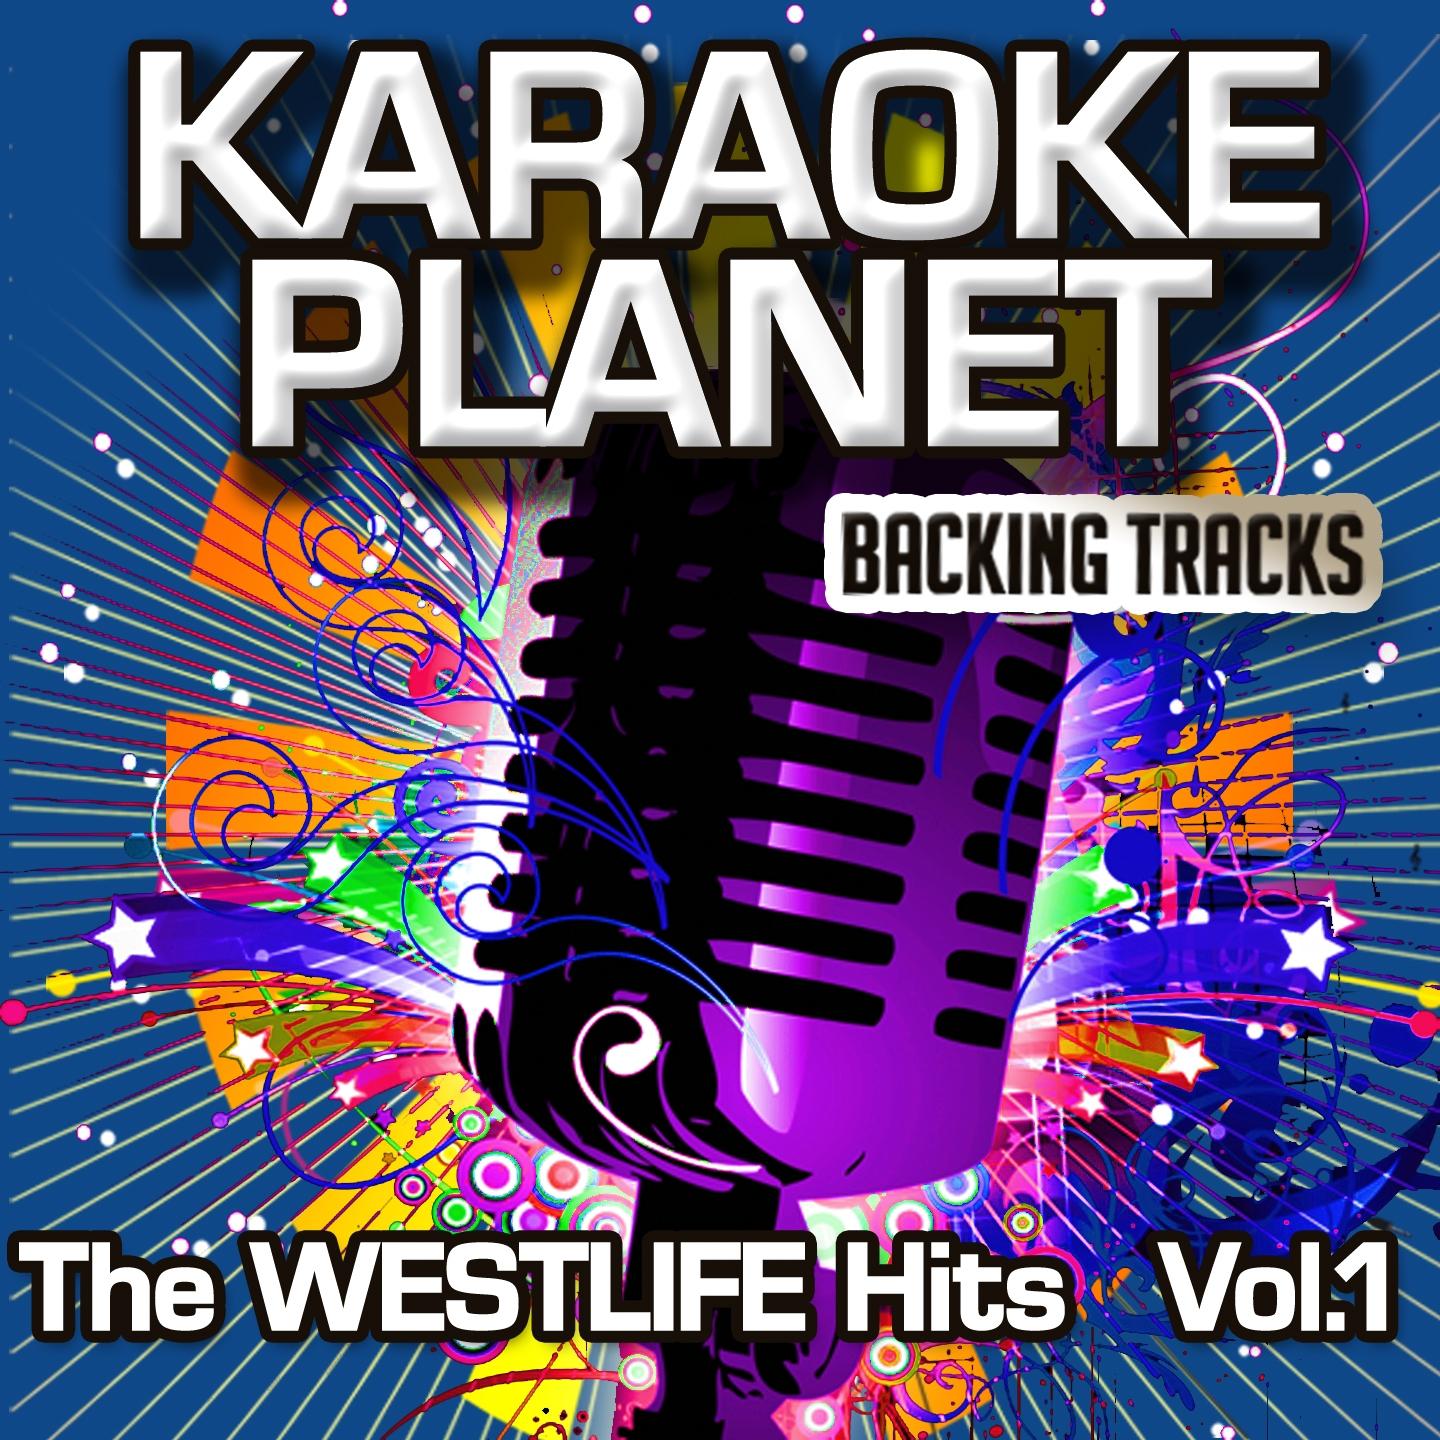 The Westlife Hits, Vol. 1